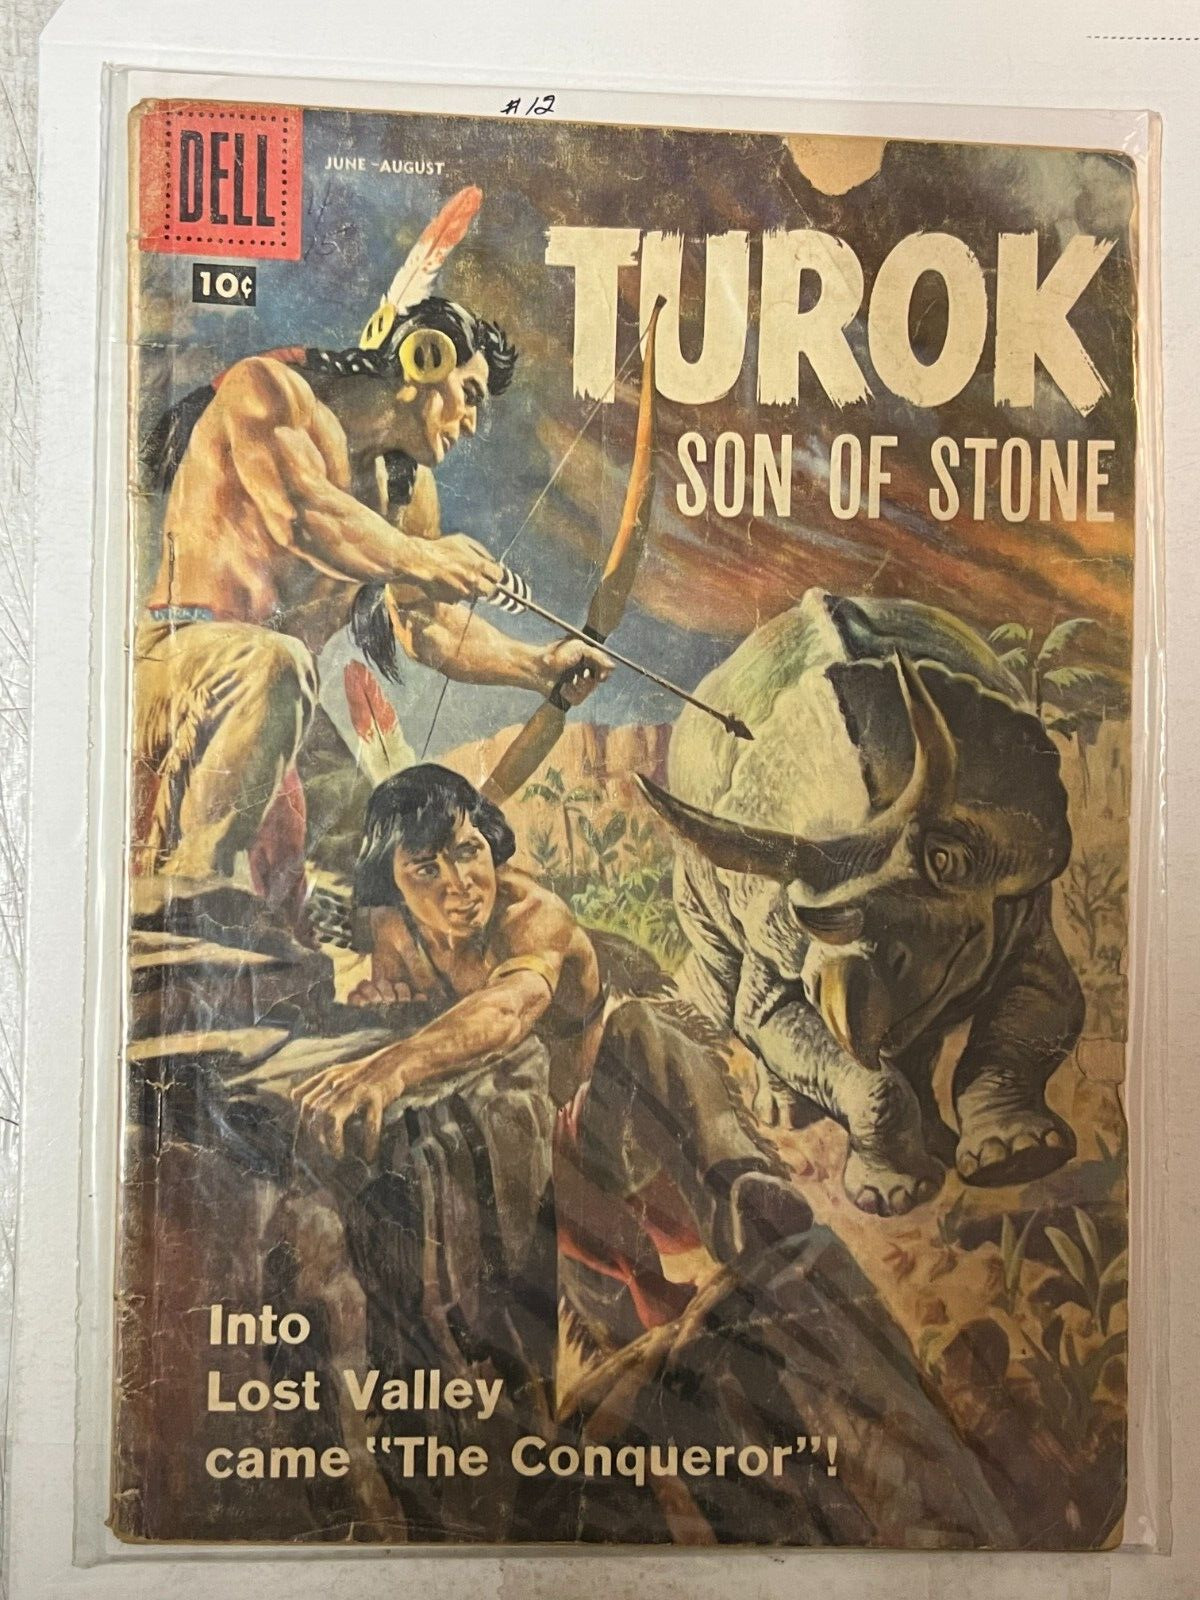 TUROK SON OF STONE # 12 DELL 1958 | Combined Shipping B&B